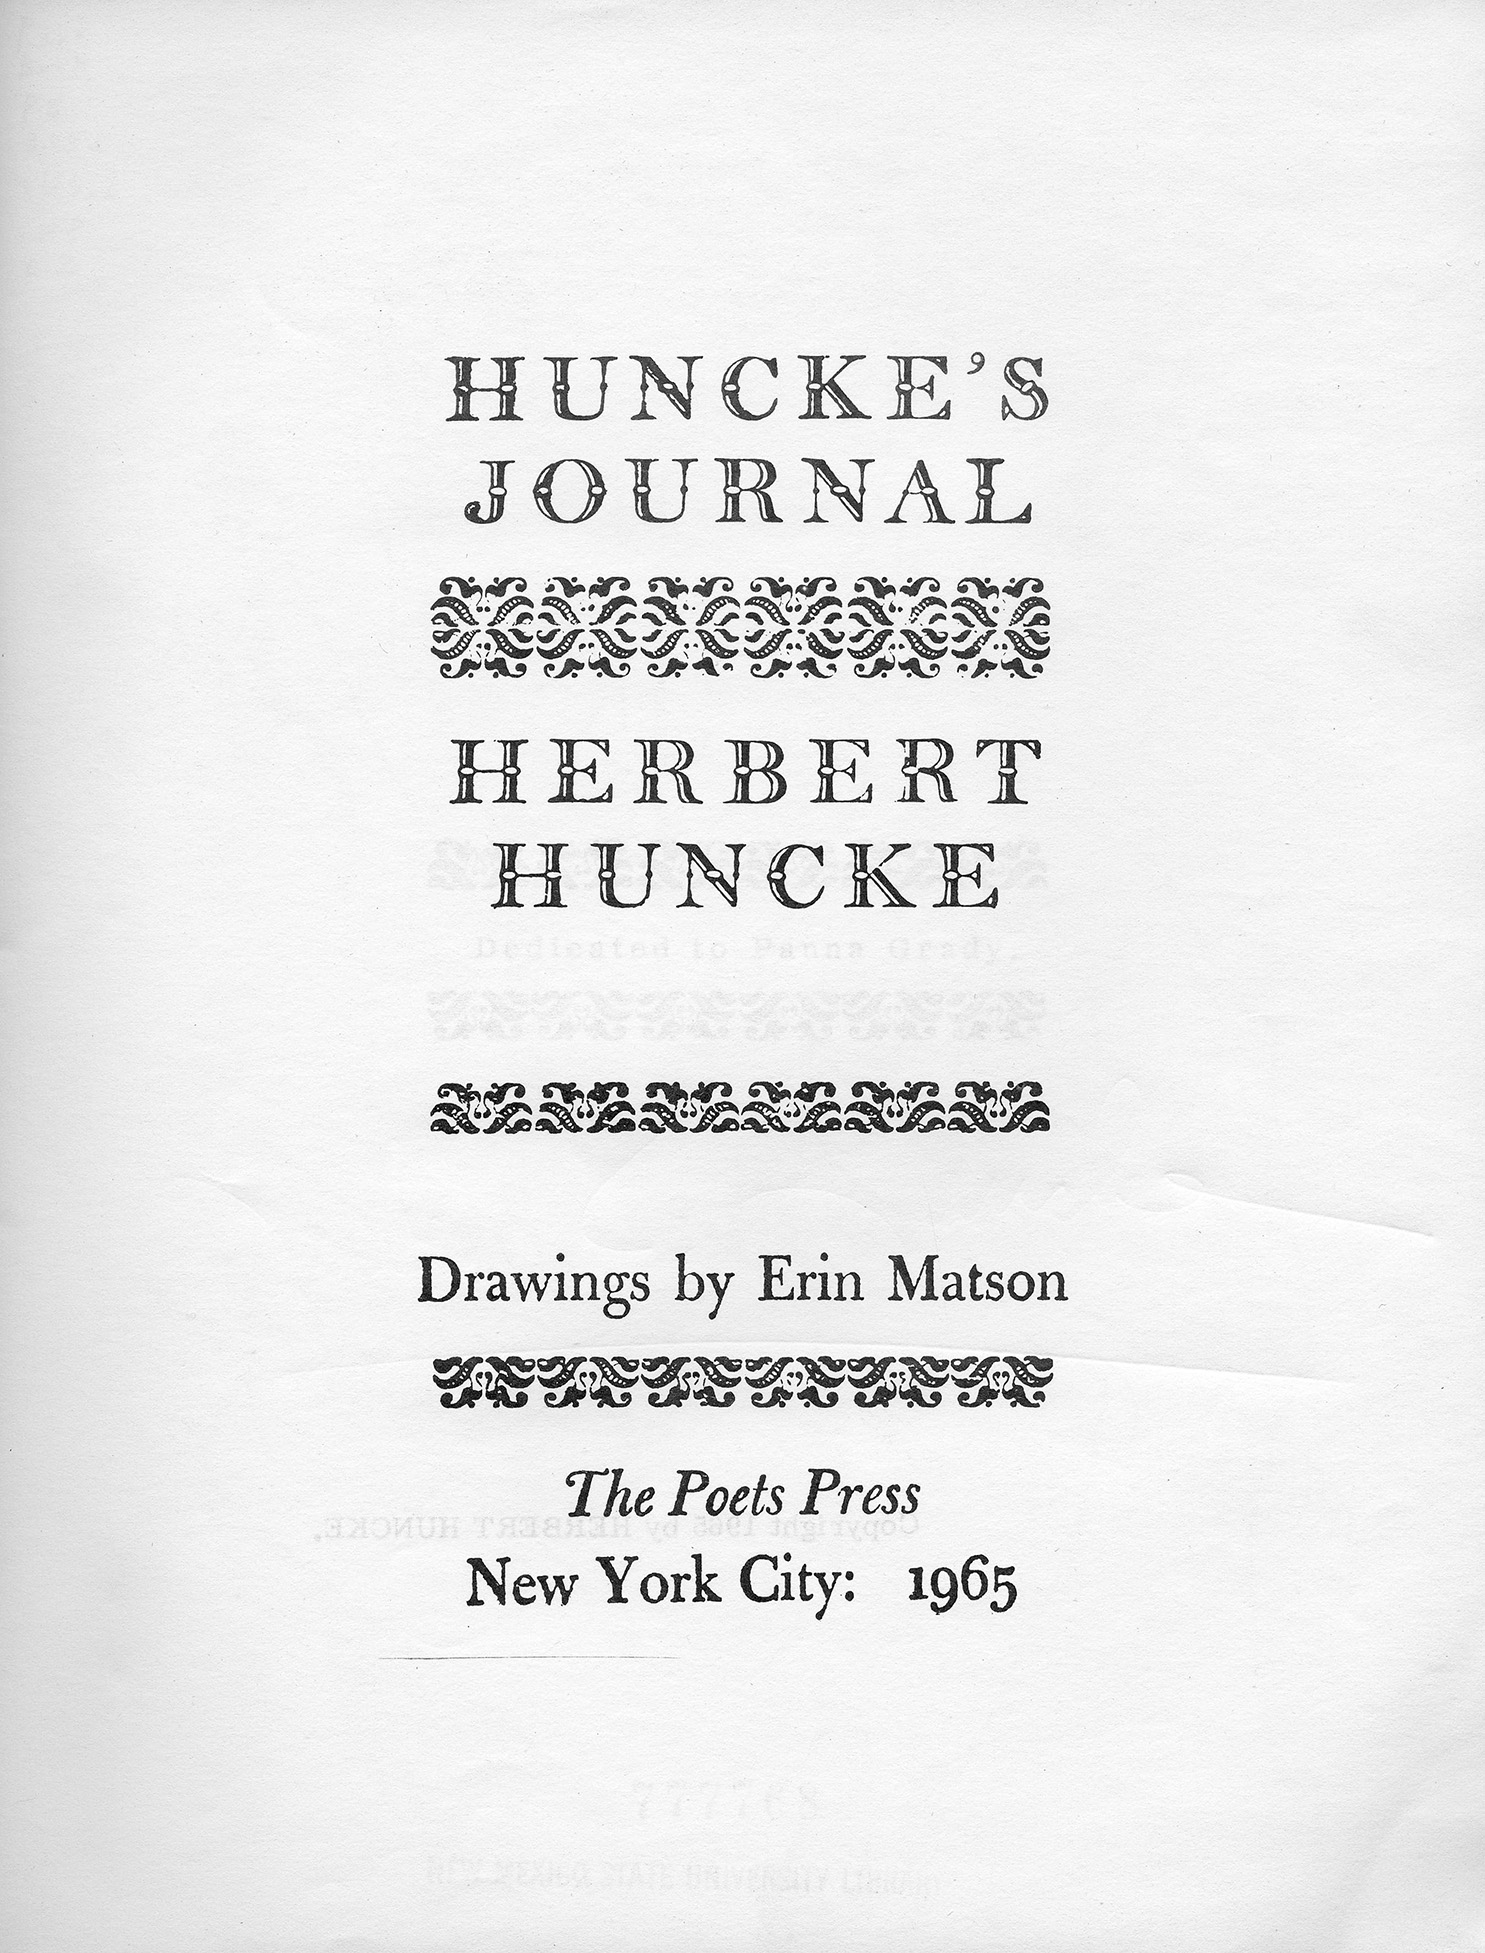 title page for Herman Huncke's book Huncke's Journal